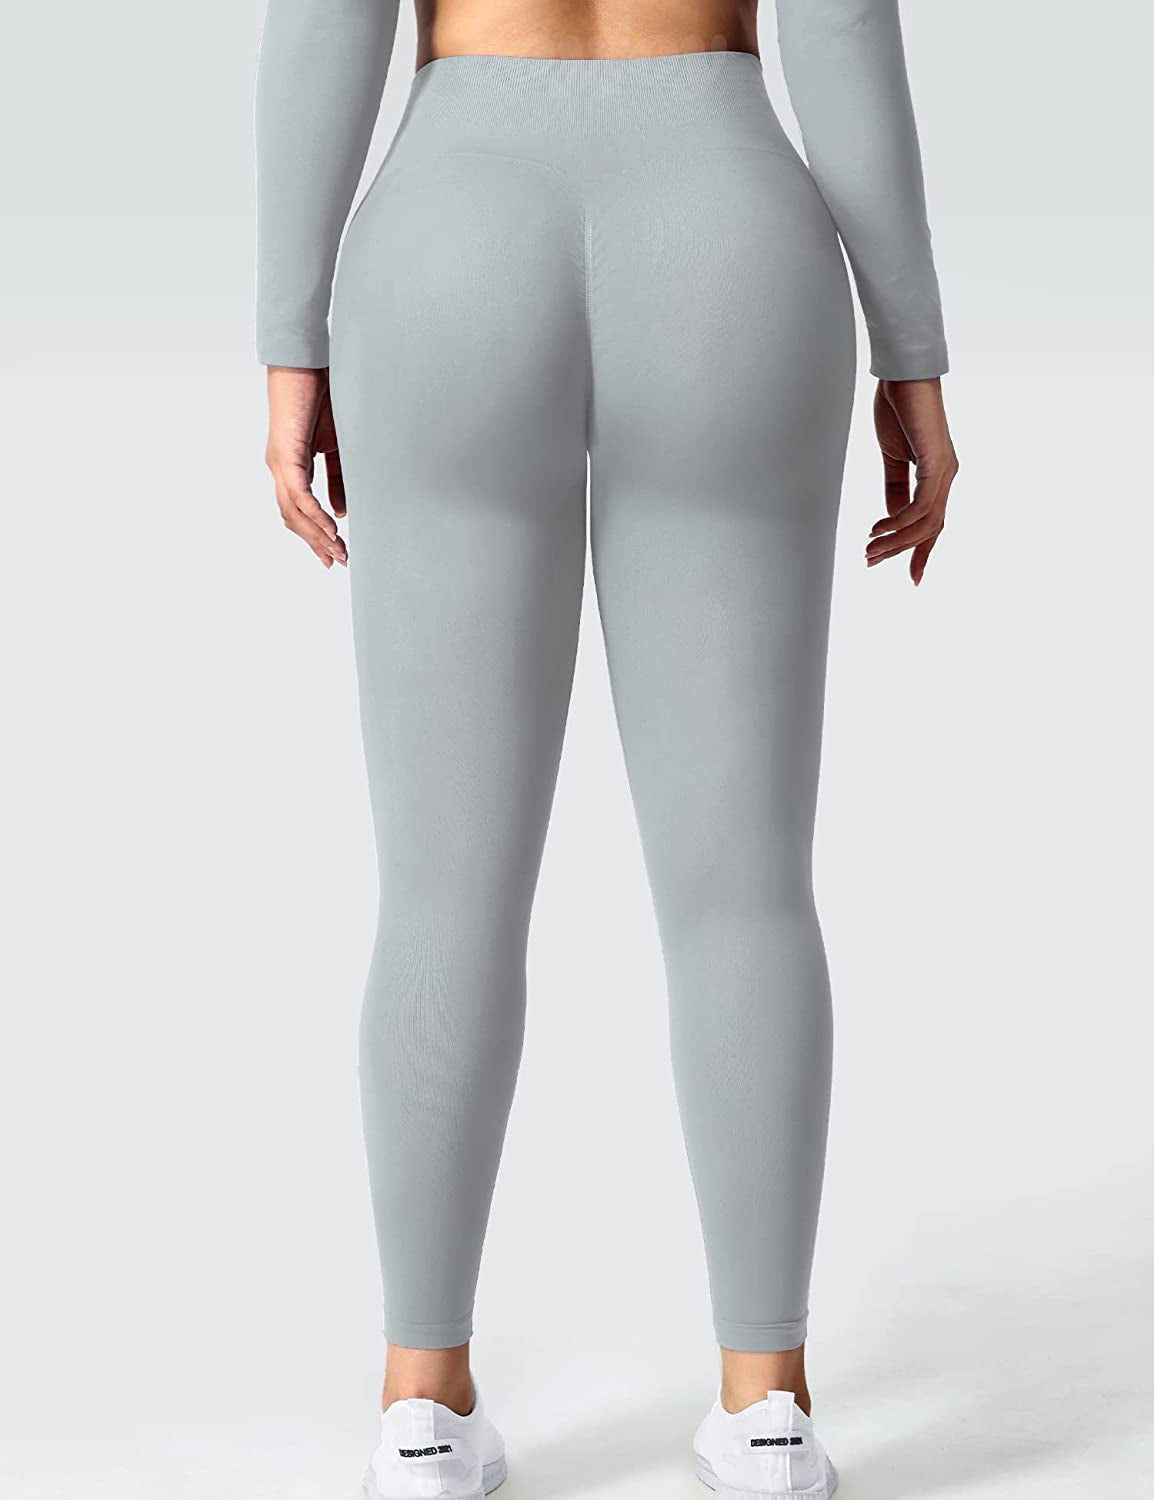 Seamless Seamless Workout Leggings For Leisure And Sports Tight And  Comfortable Style #230406 From Kong01, $12.56